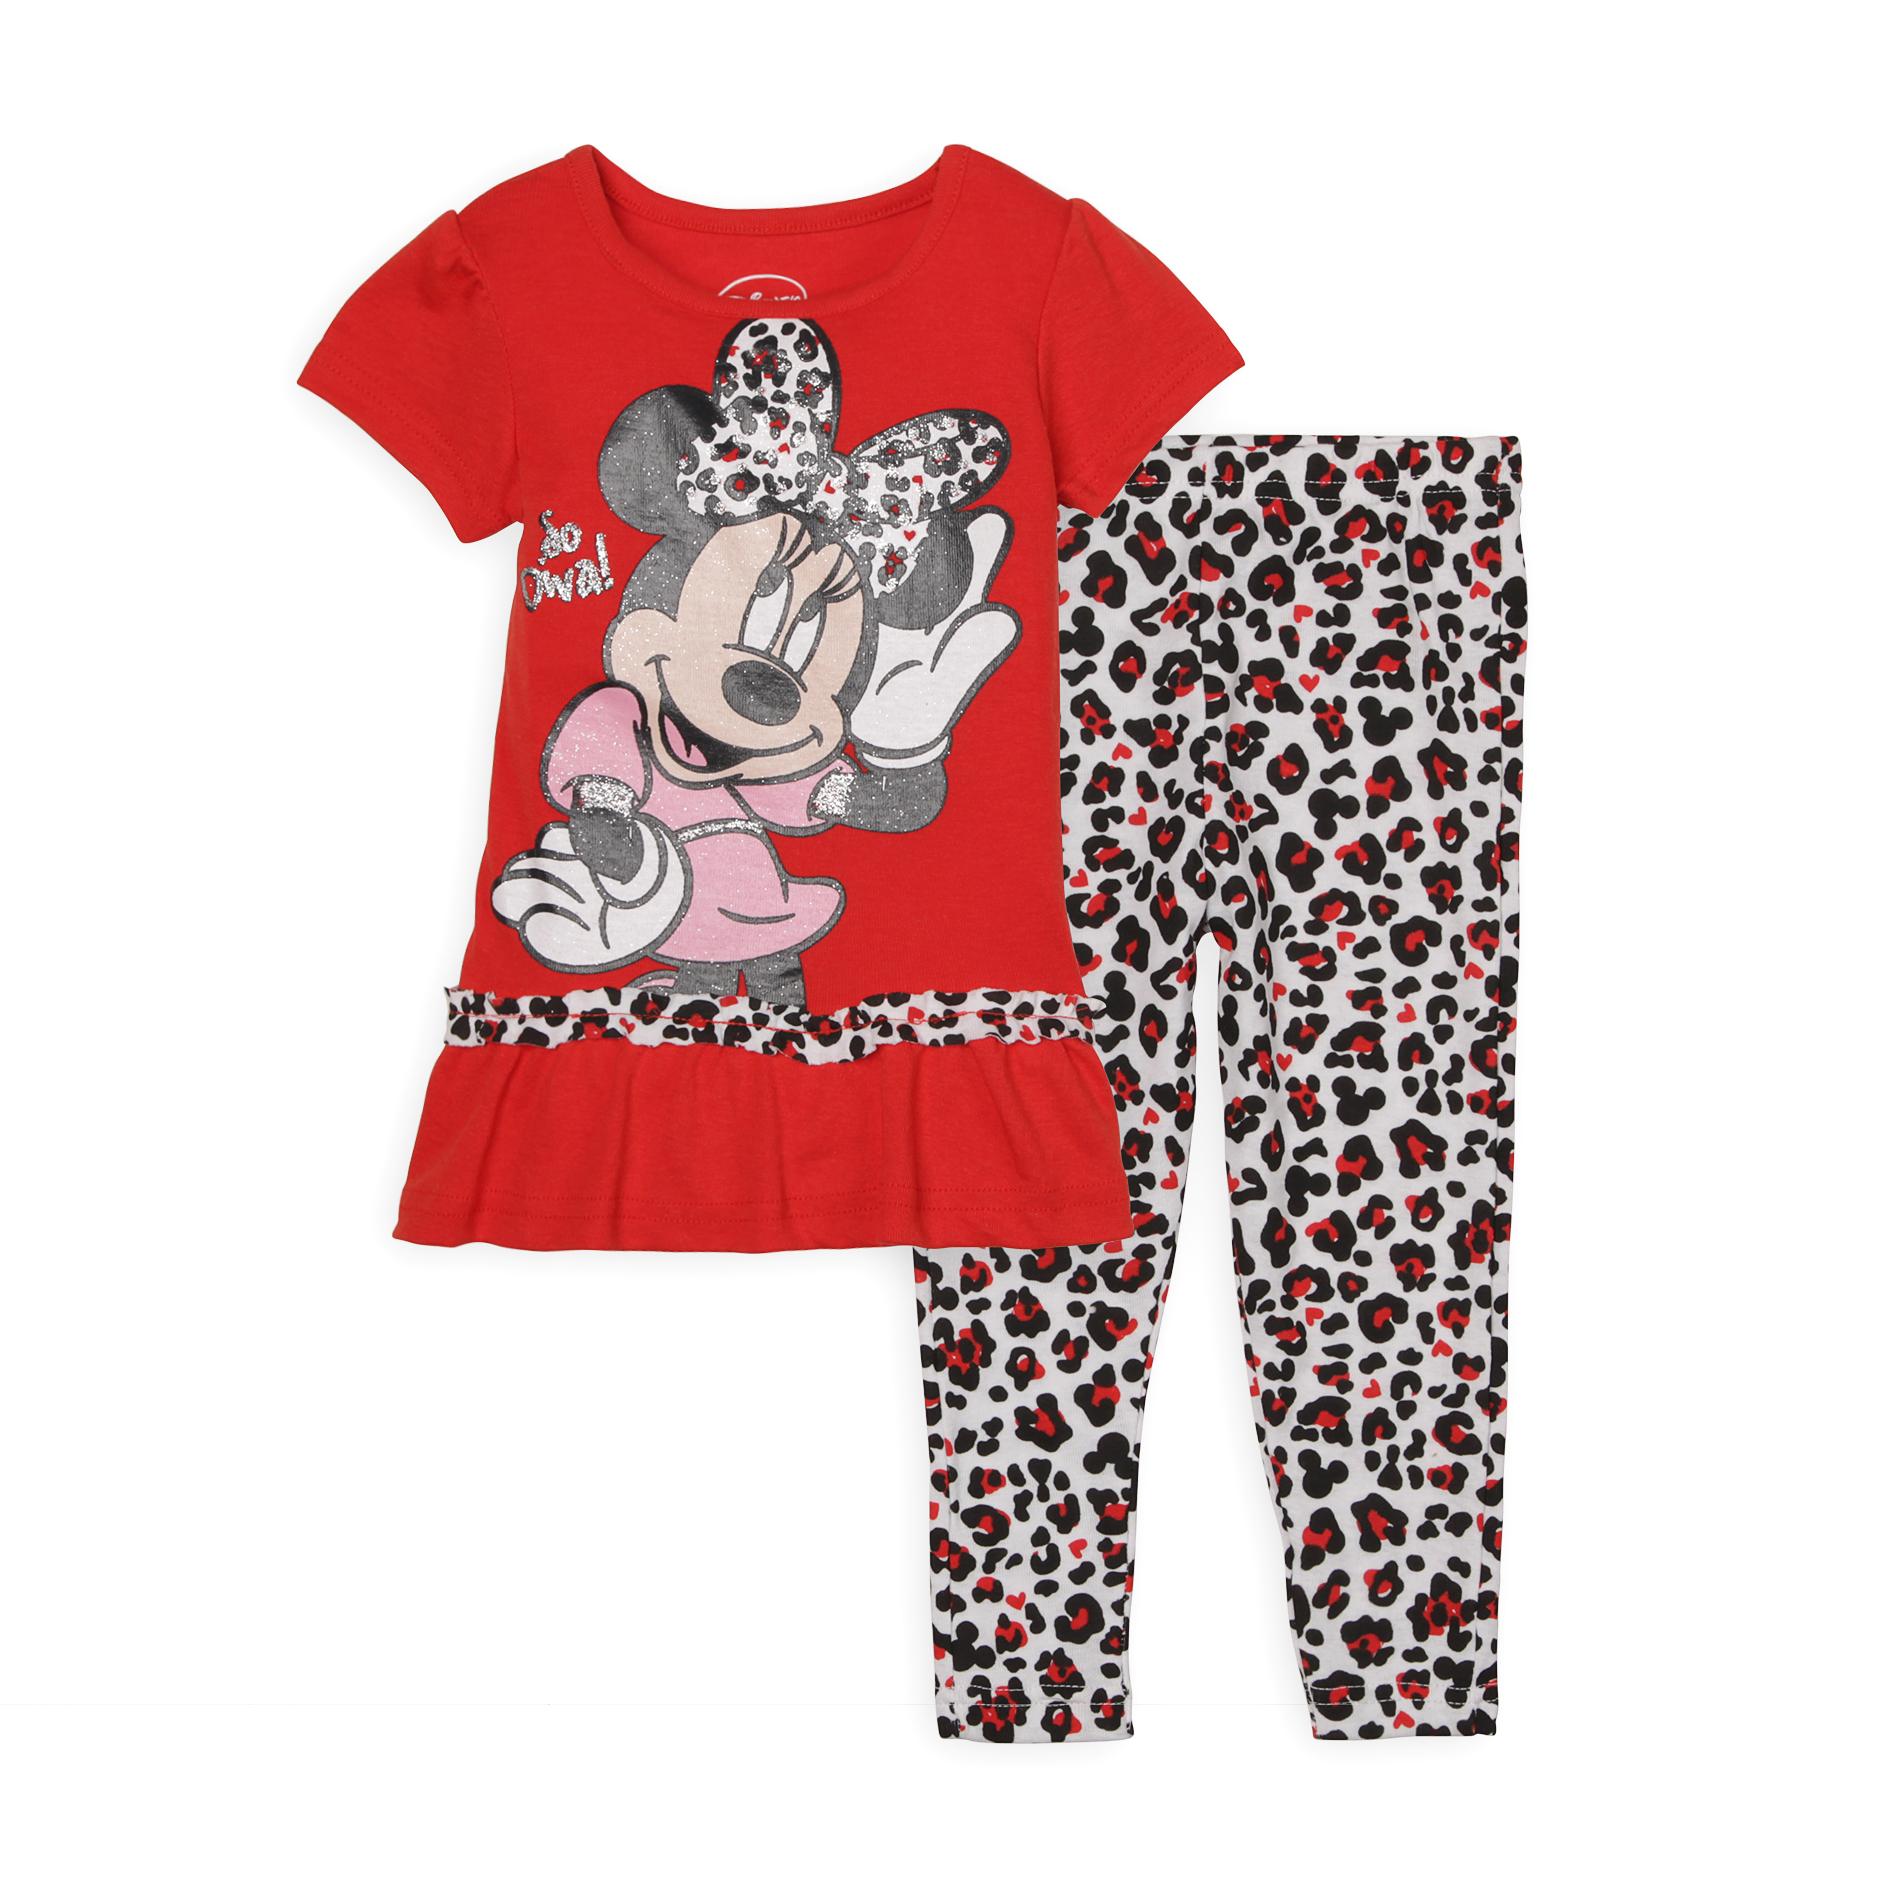 Disney Infant & Toddler Girl's Tunic Top & Leggings - Minnie Mouse